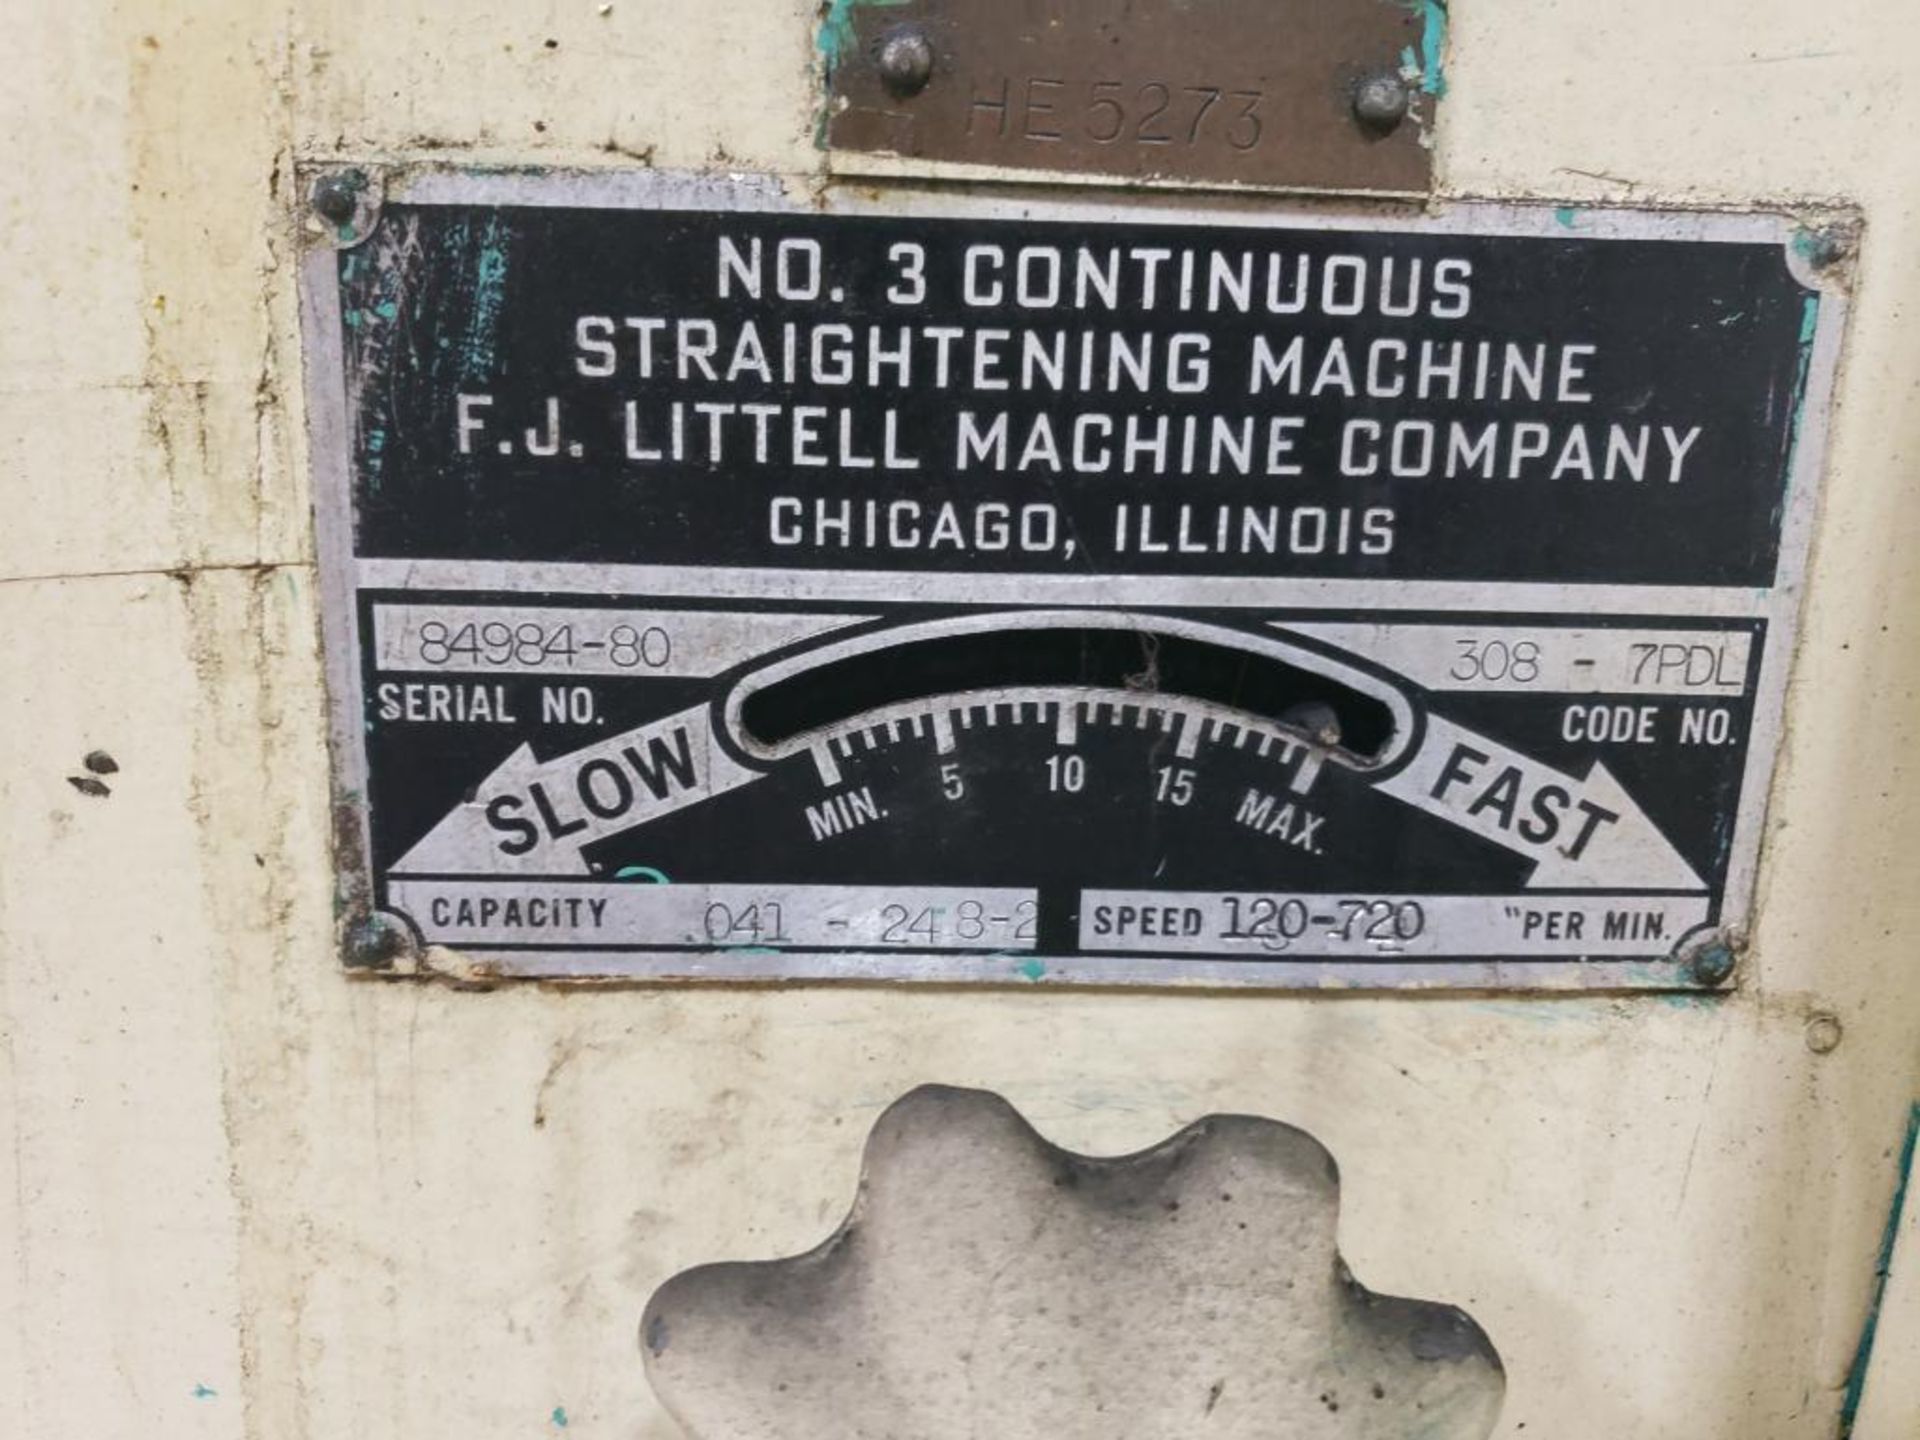 F.J. Littell Machine Co. No. 3 Continuous straightening machine. S/N: 84984-80. Code No.: 308-7PDL. - Image 5 of 12